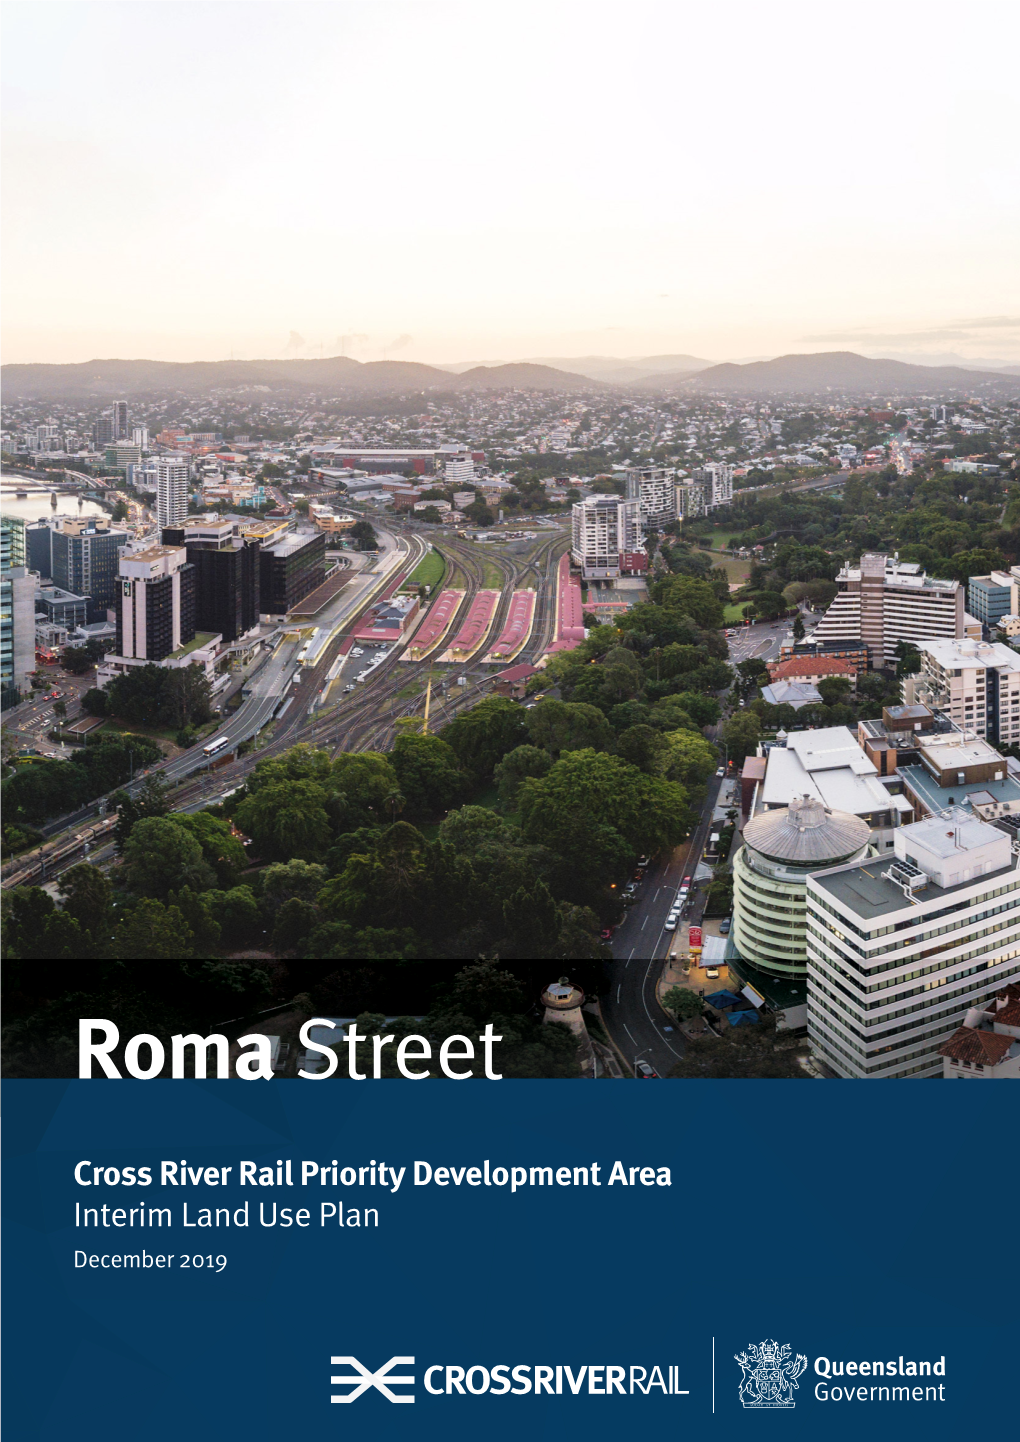 Roma Street Cross River Rail (CRR) PDA Was Declared by a Regulation4 on 13 December 2019